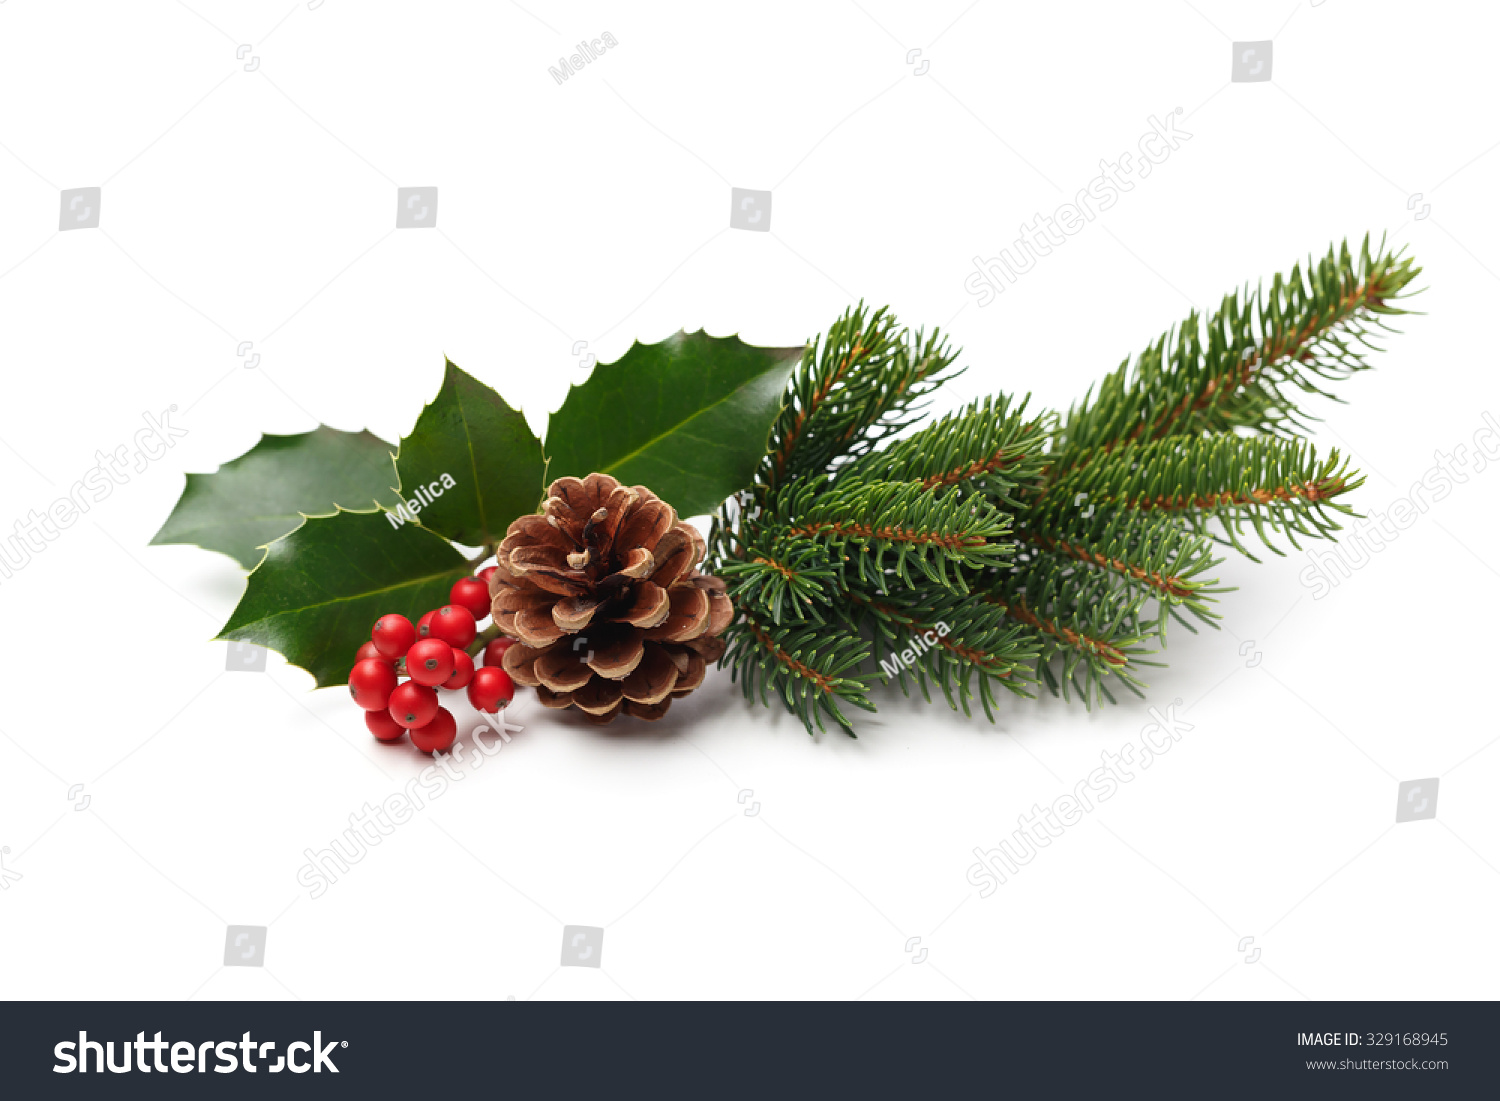 Christmas decoration of holly berry and pine cone #329168945